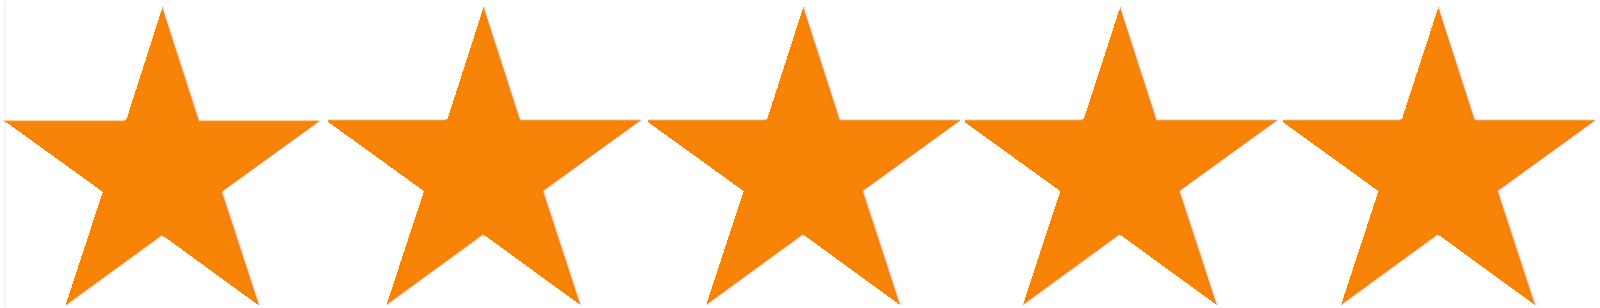 Reviewter Star